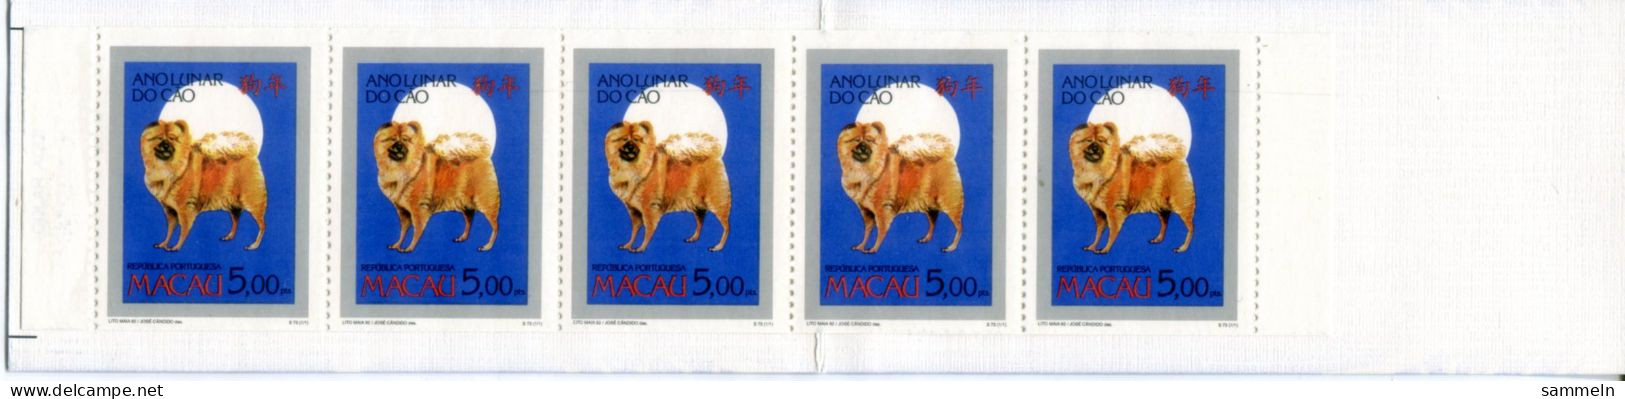 MACAO 746 C MH Mnh - Chinesisches Jahr Des Hundes, Chinese Year Of The Dog, Année Chinoise Du Chien - MACAU - Cuadernillos